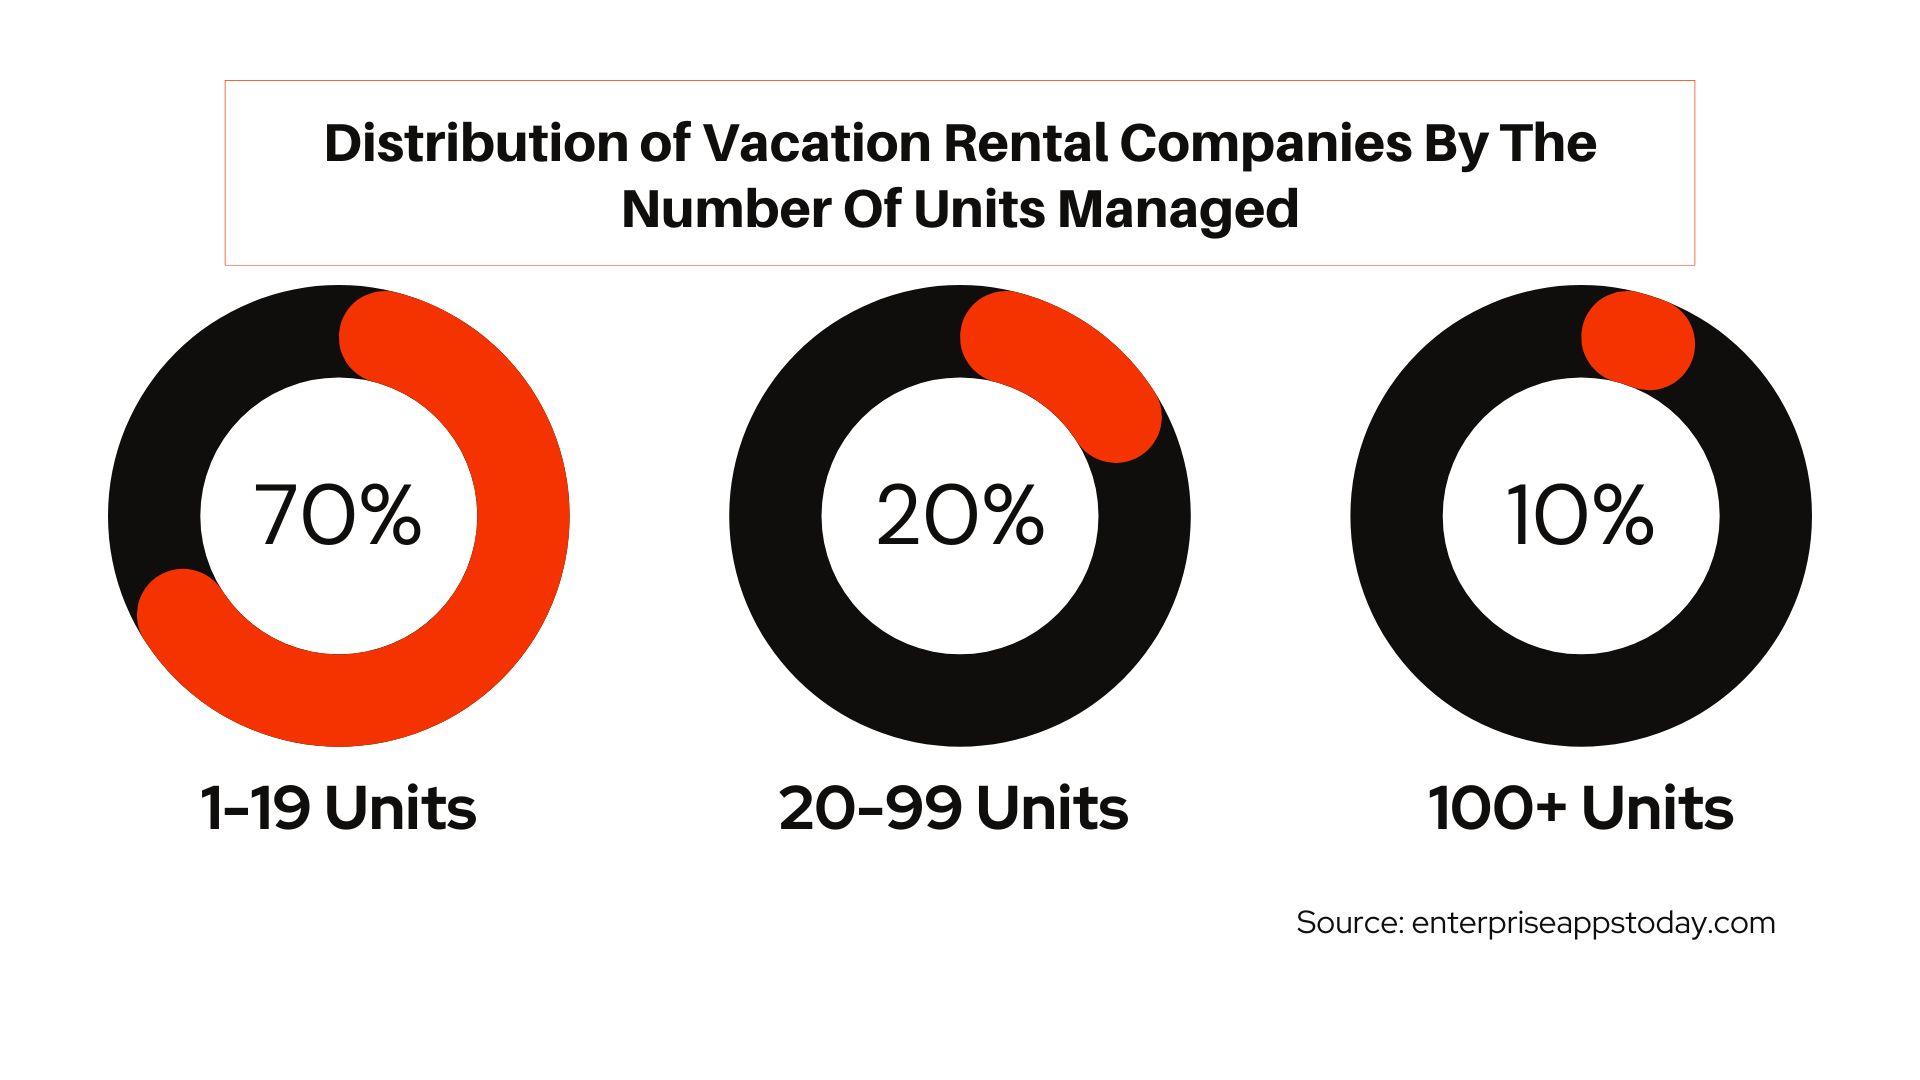 Distribution of Vacation Rental Companies By The Number Of Units Managed